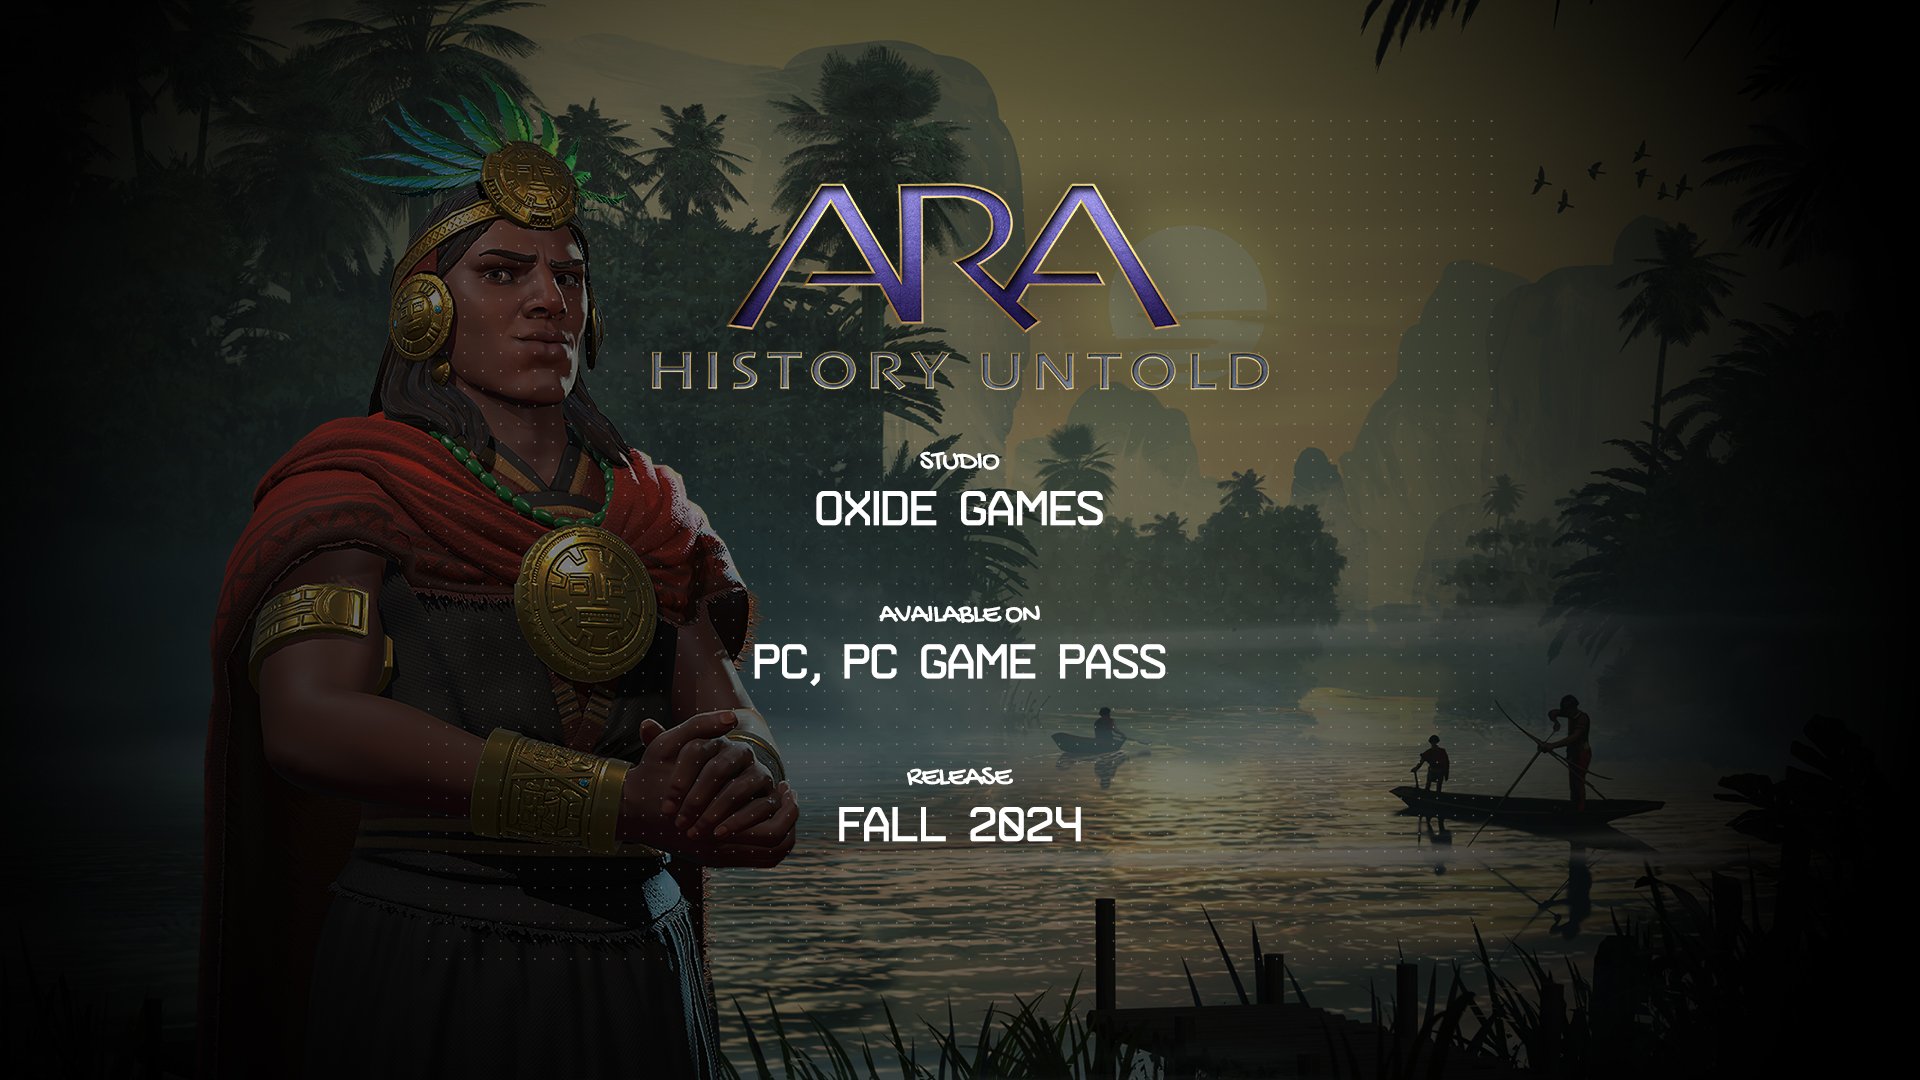 #
      Ara: History Untold launches this fall